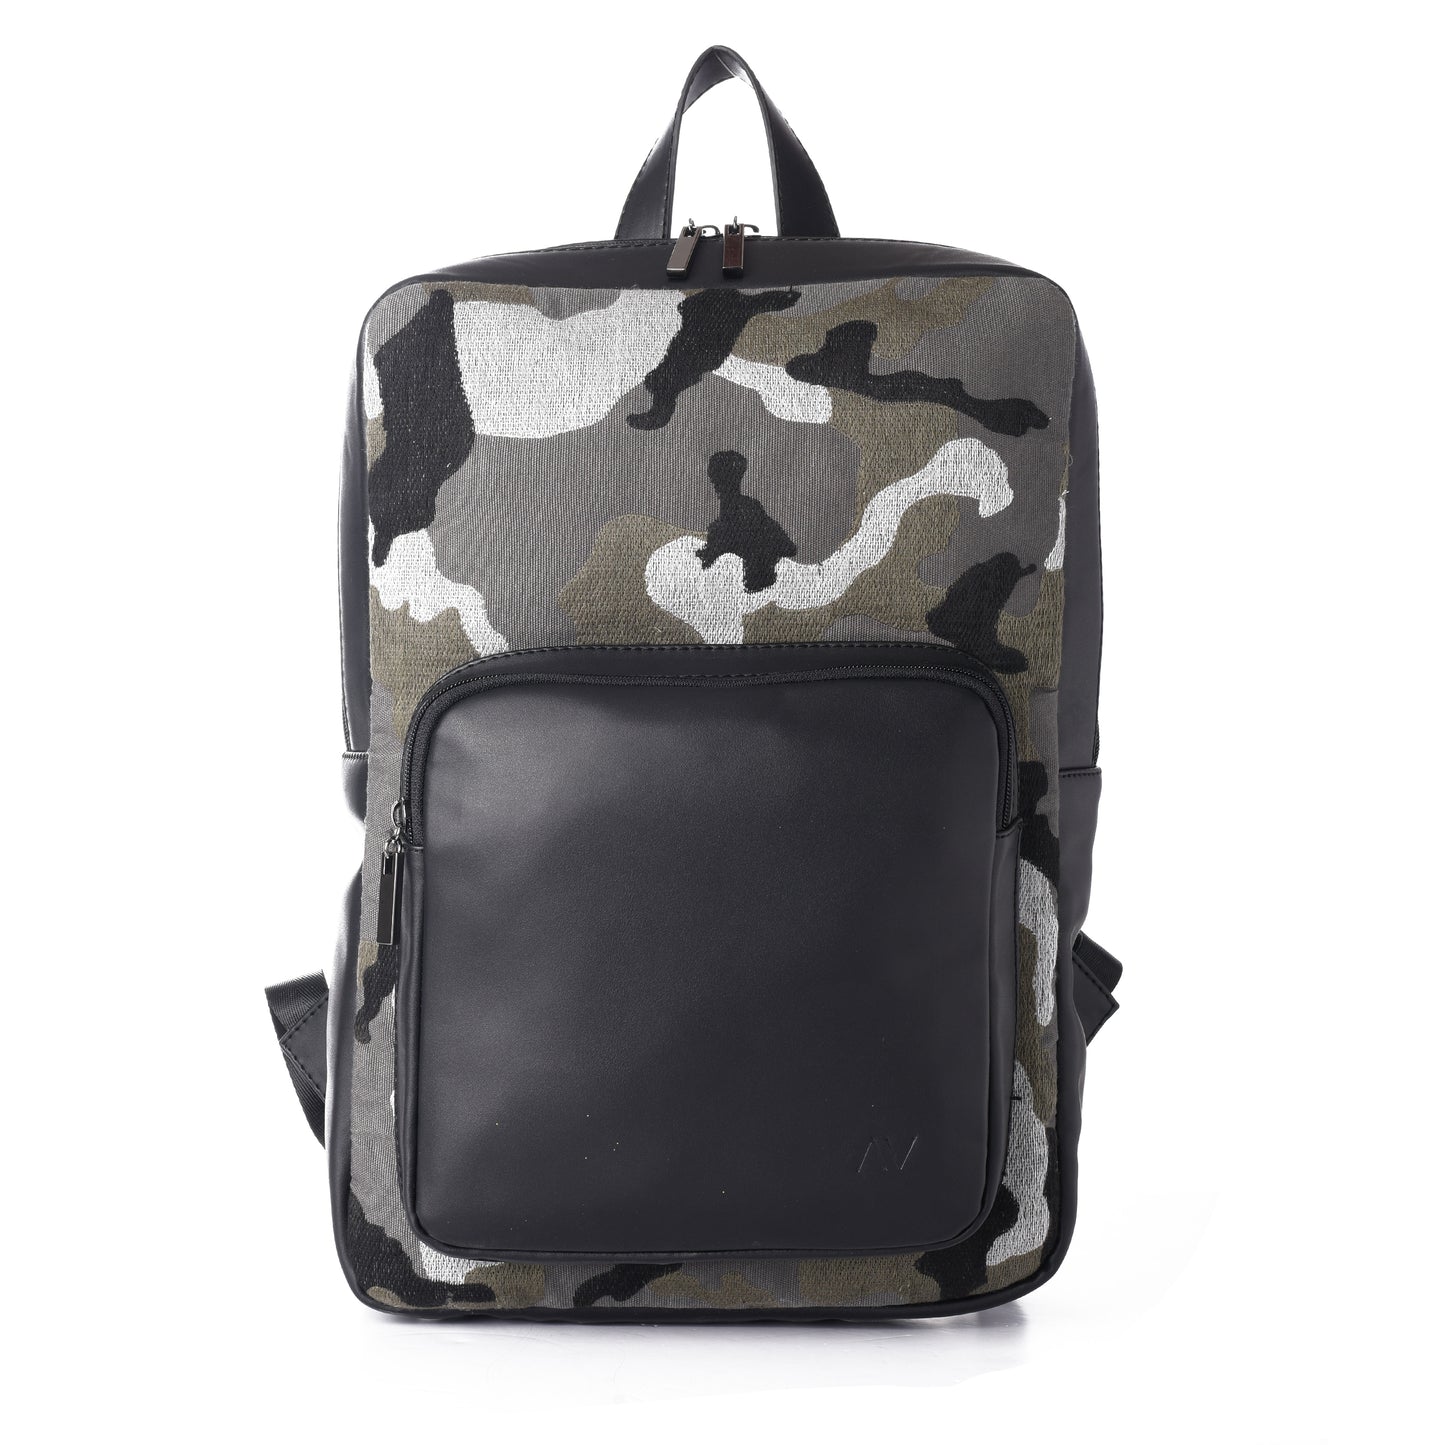 Laptop black with Olive Army pattern Backpack